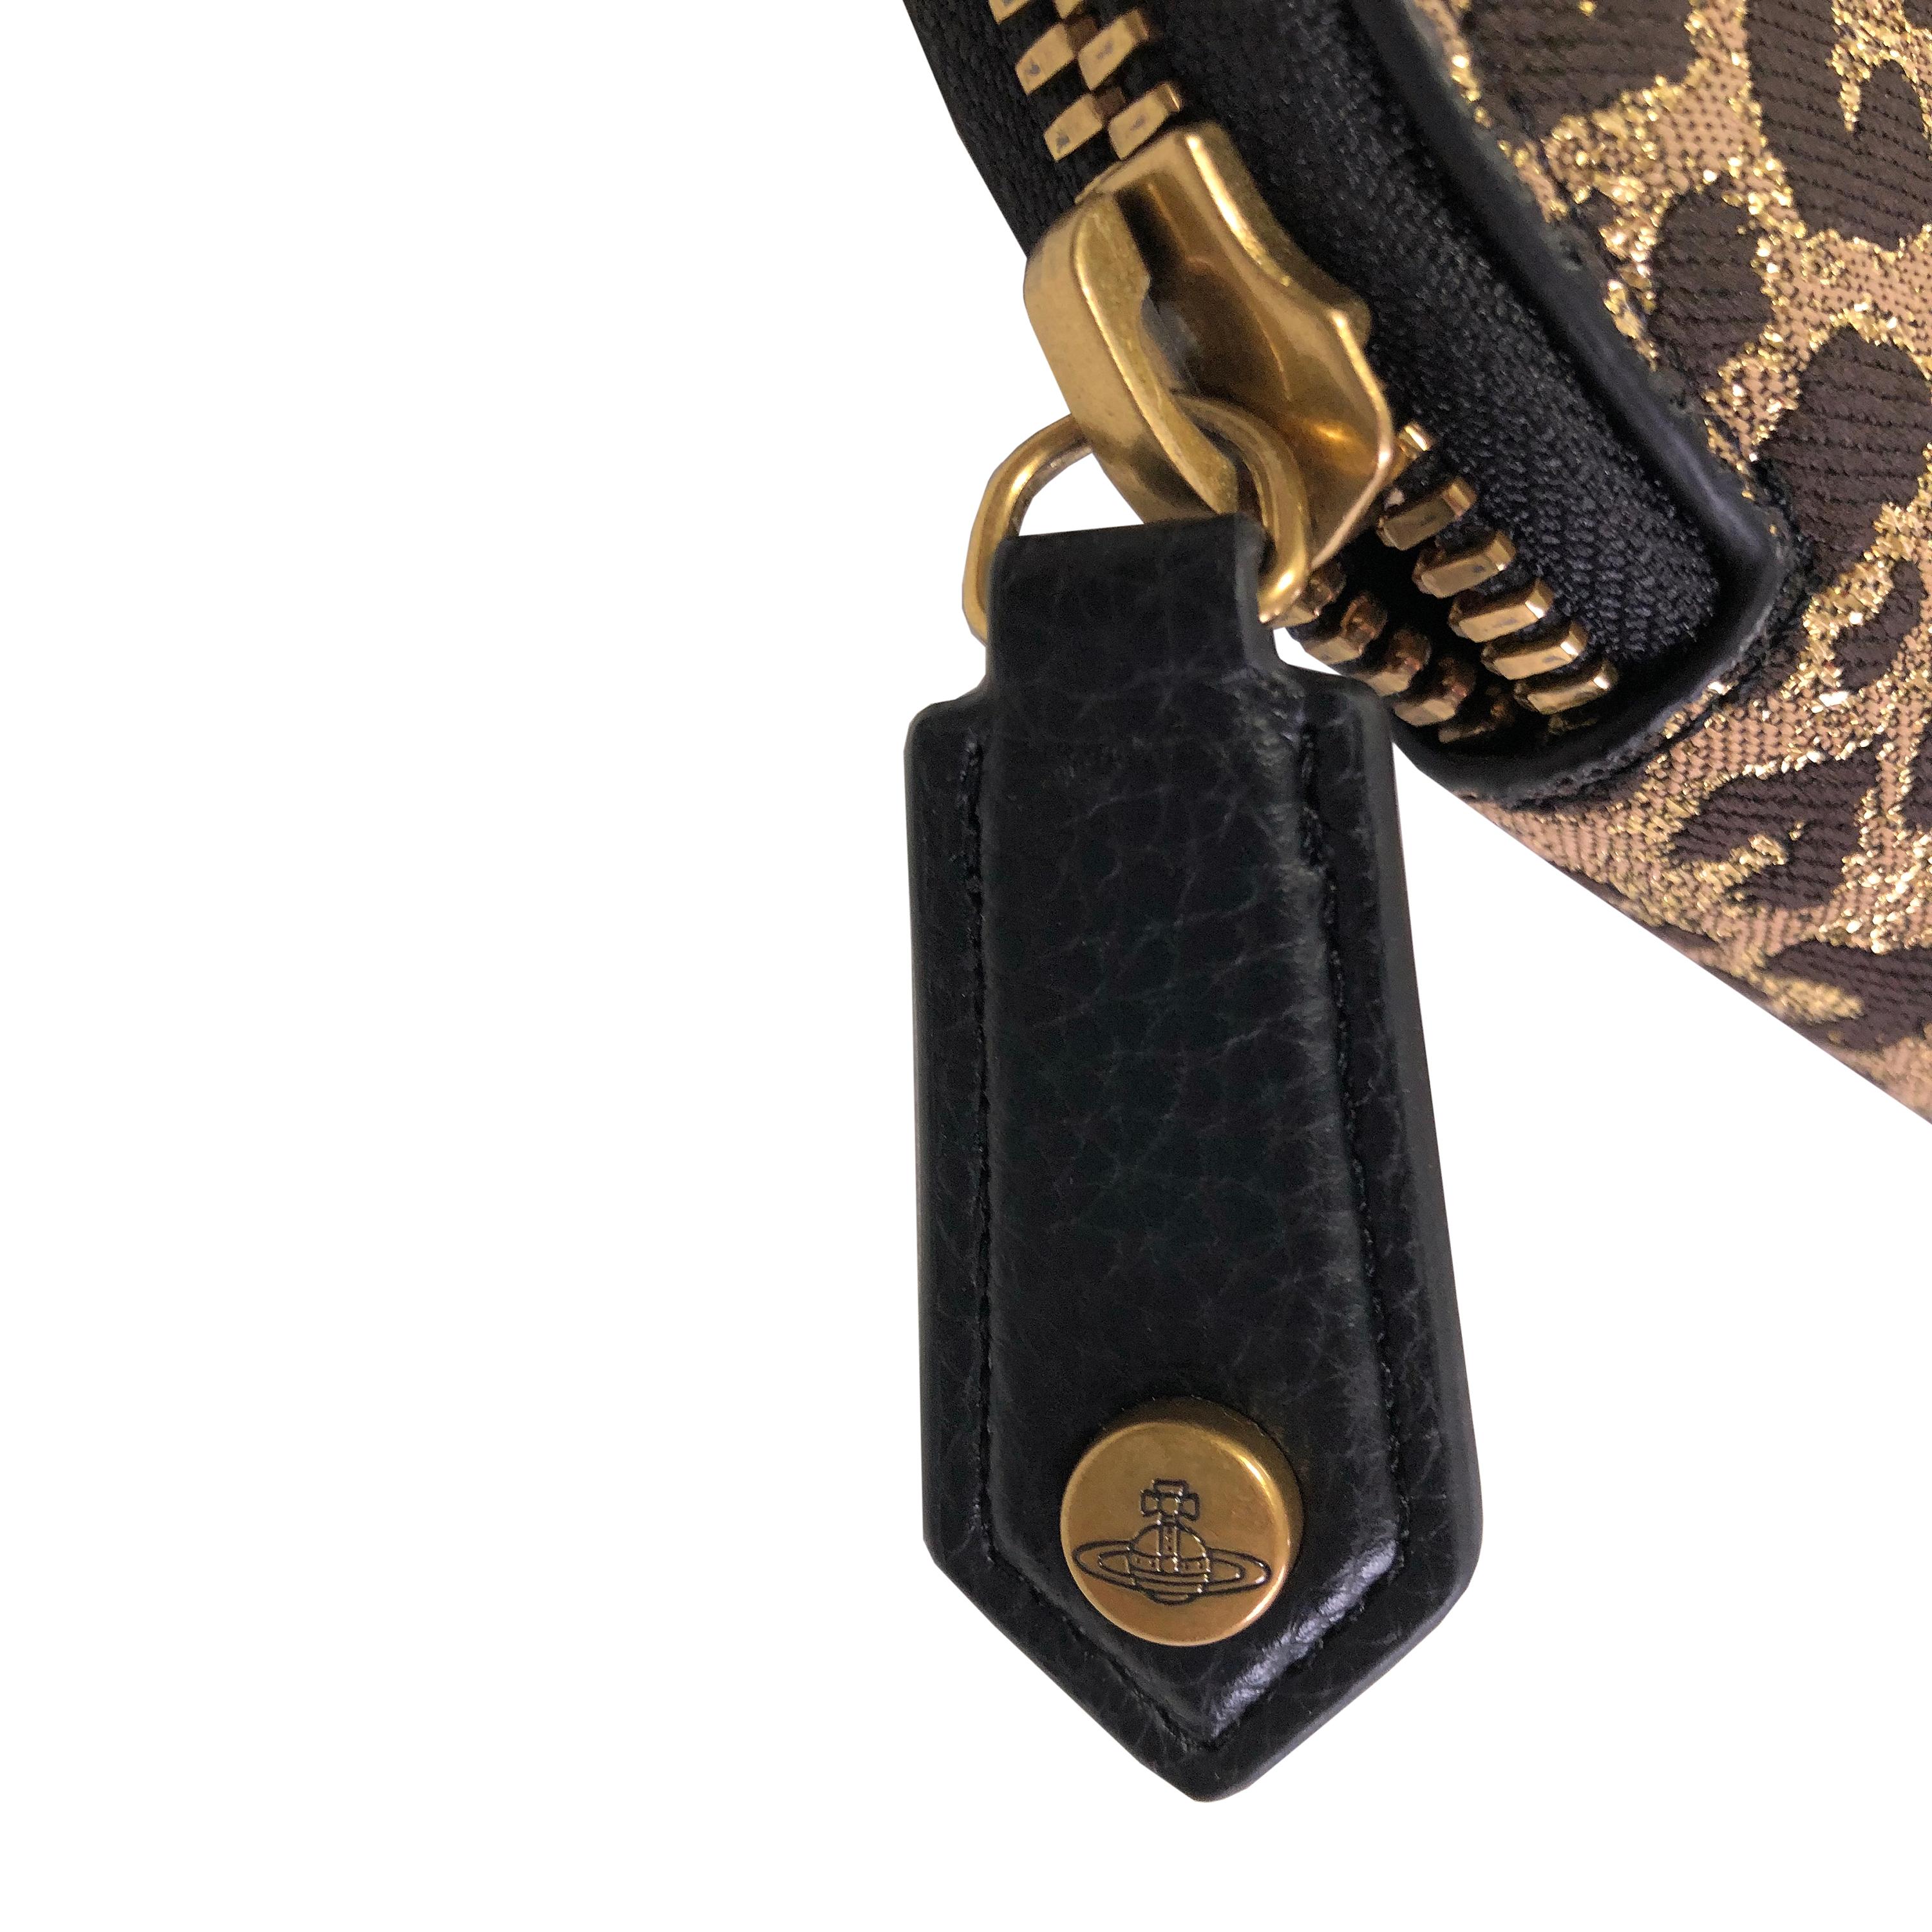 Vivienne Westwood - Heart Crossbody Bag - Gold Leopard Jacquard - NEW With Tags For Sale 2